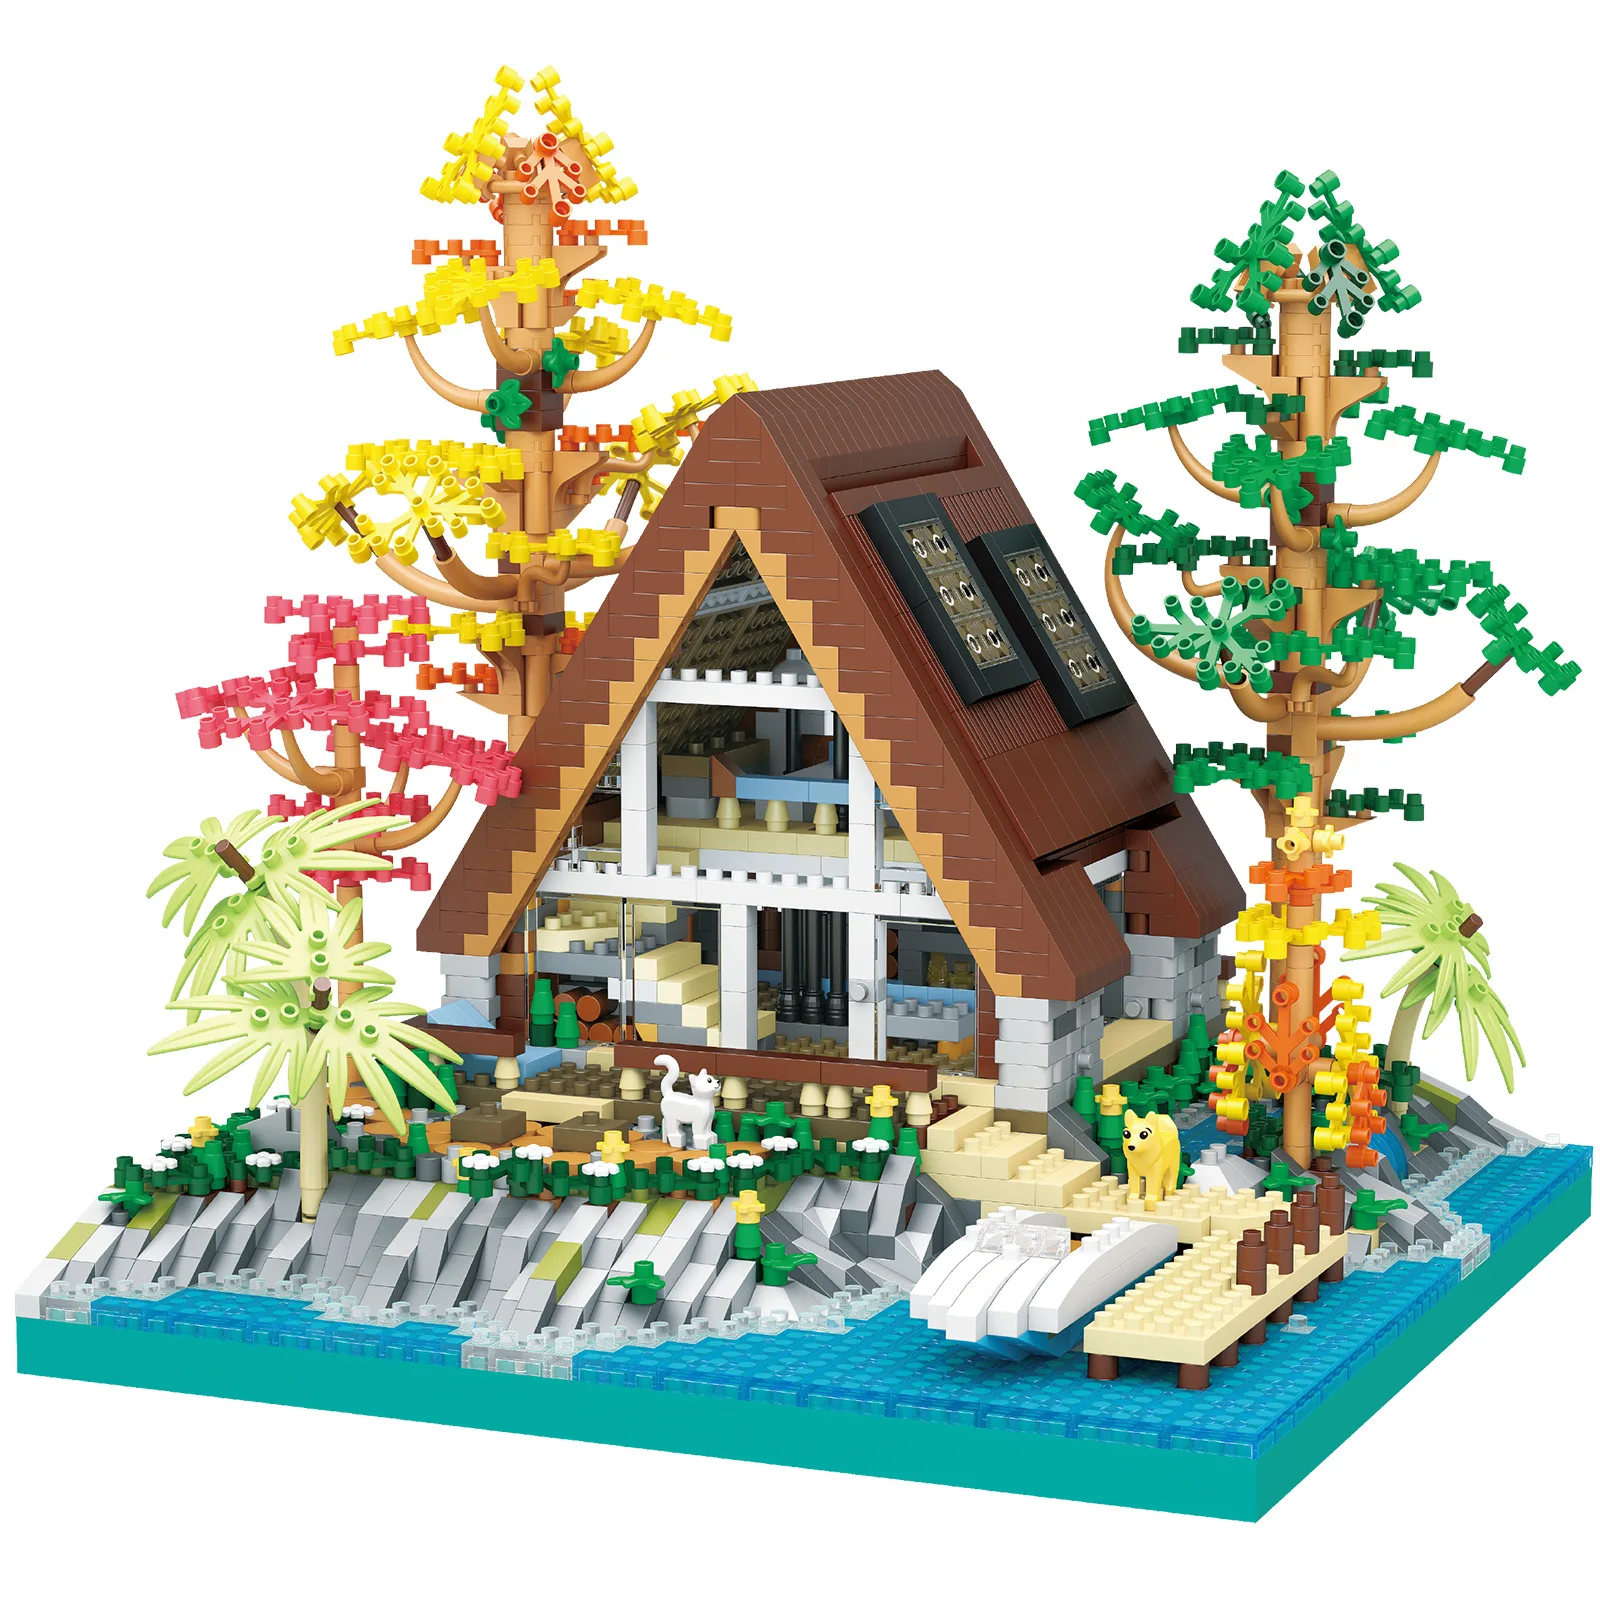 Creative City Street View House Micro Diamond Block Lakeside Cabin Streetscape Model Building Brick Figures Toy For Kids Gifts jiestar 4560pcs moc creative street view series the post office building blocks bricks house model toys for kids gifts 89126